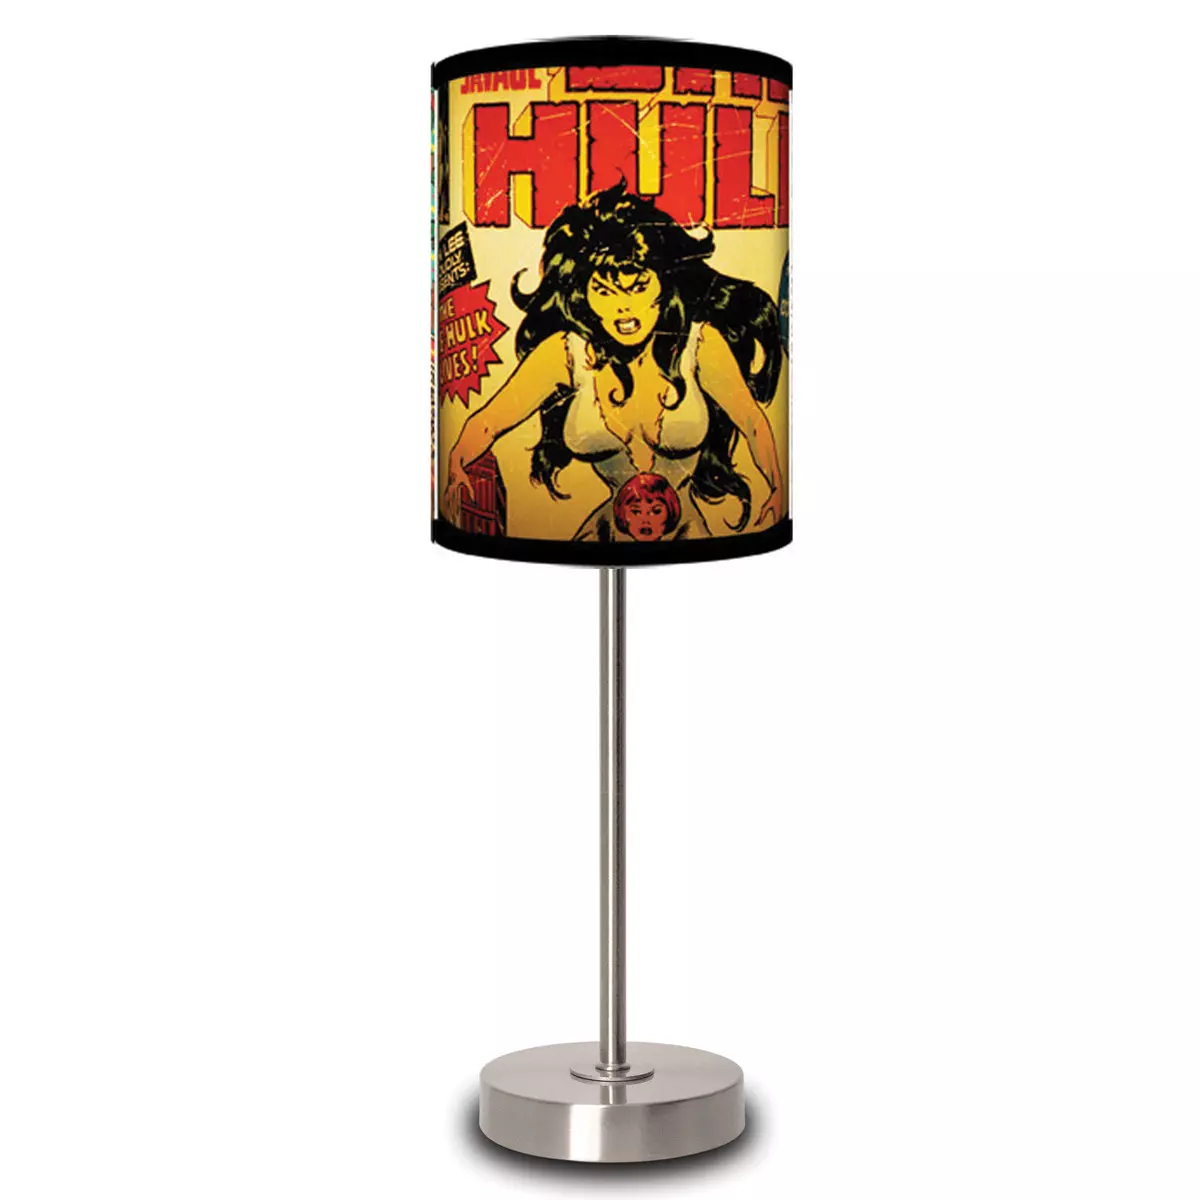 Marvel Comics Table Lamps Illuminate Panels of Your